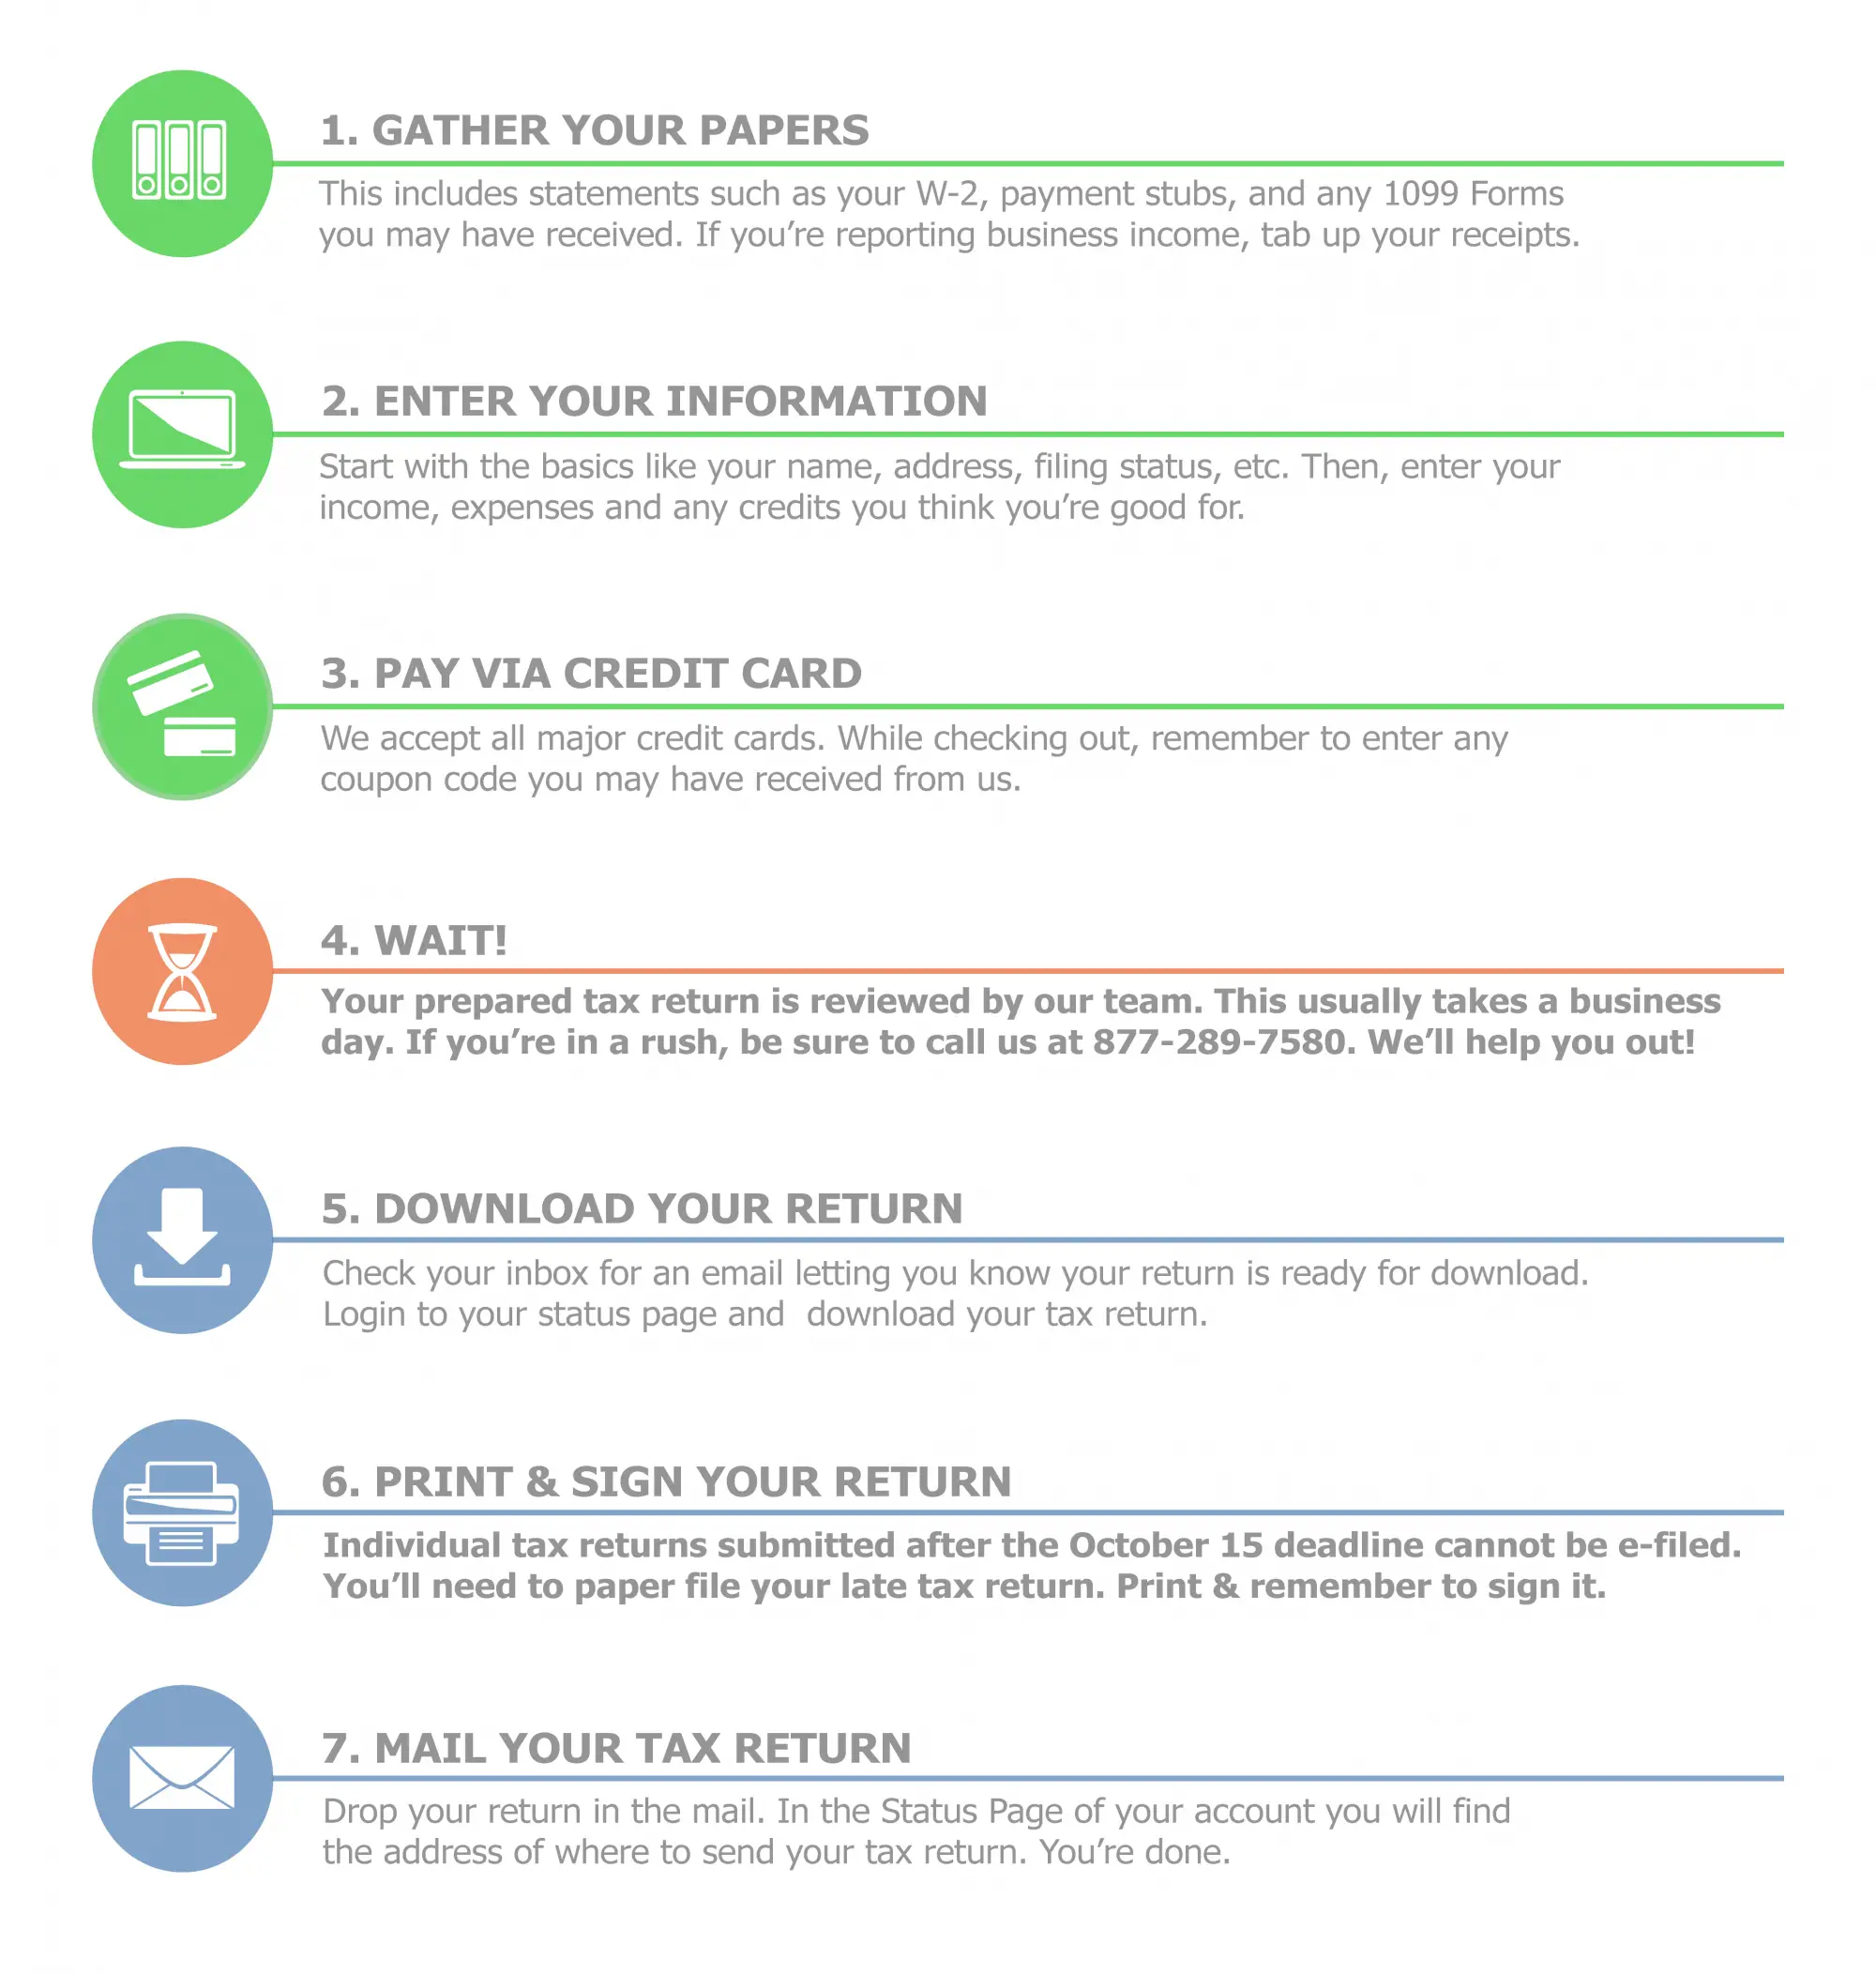 File a Late 2011 Tax Return in 7 Simple Steps